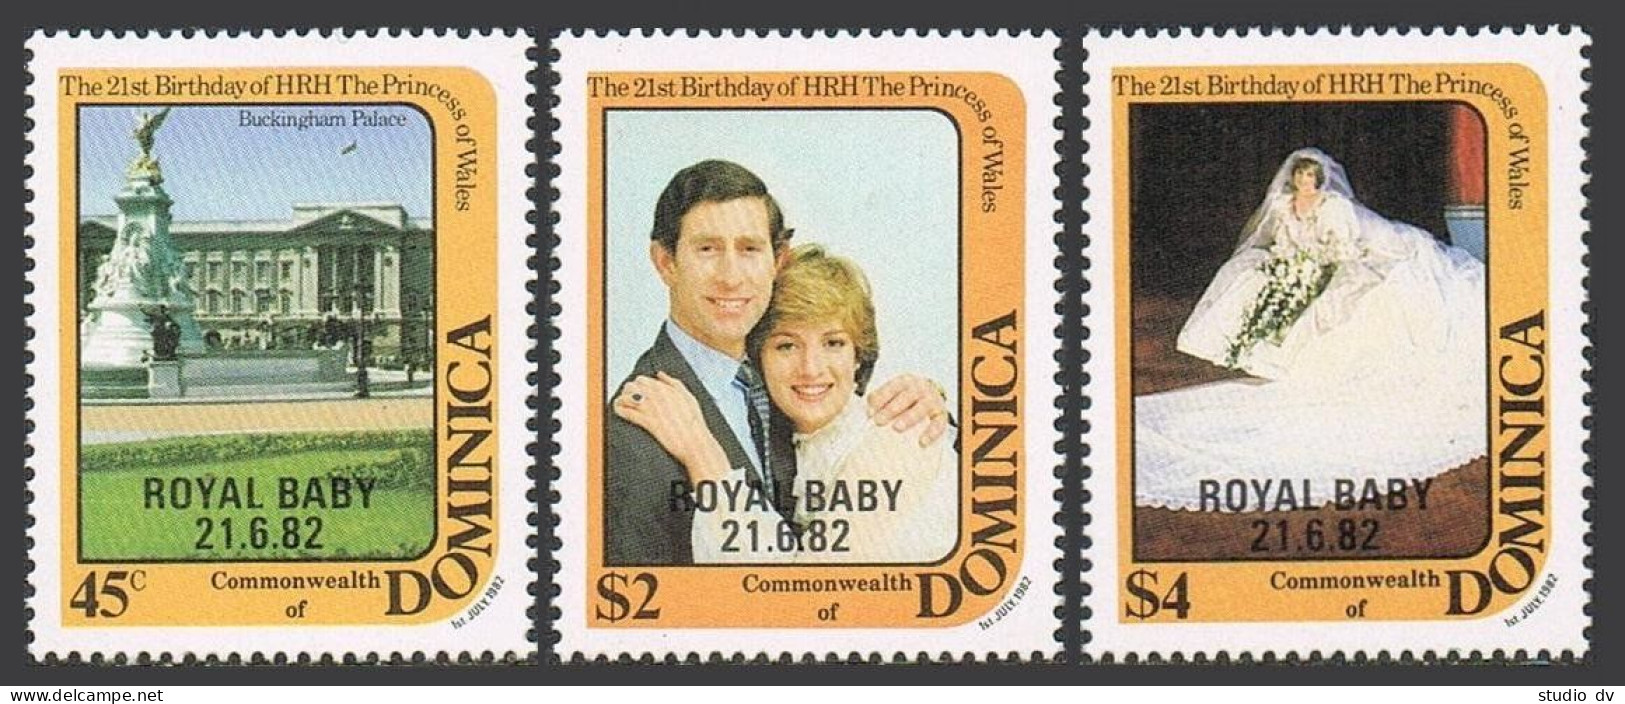 Dominica 782-784,MNH.Michel 796-798. Princess Diana-Royal Baby,1982.Palace. - Dominique (1978-...)